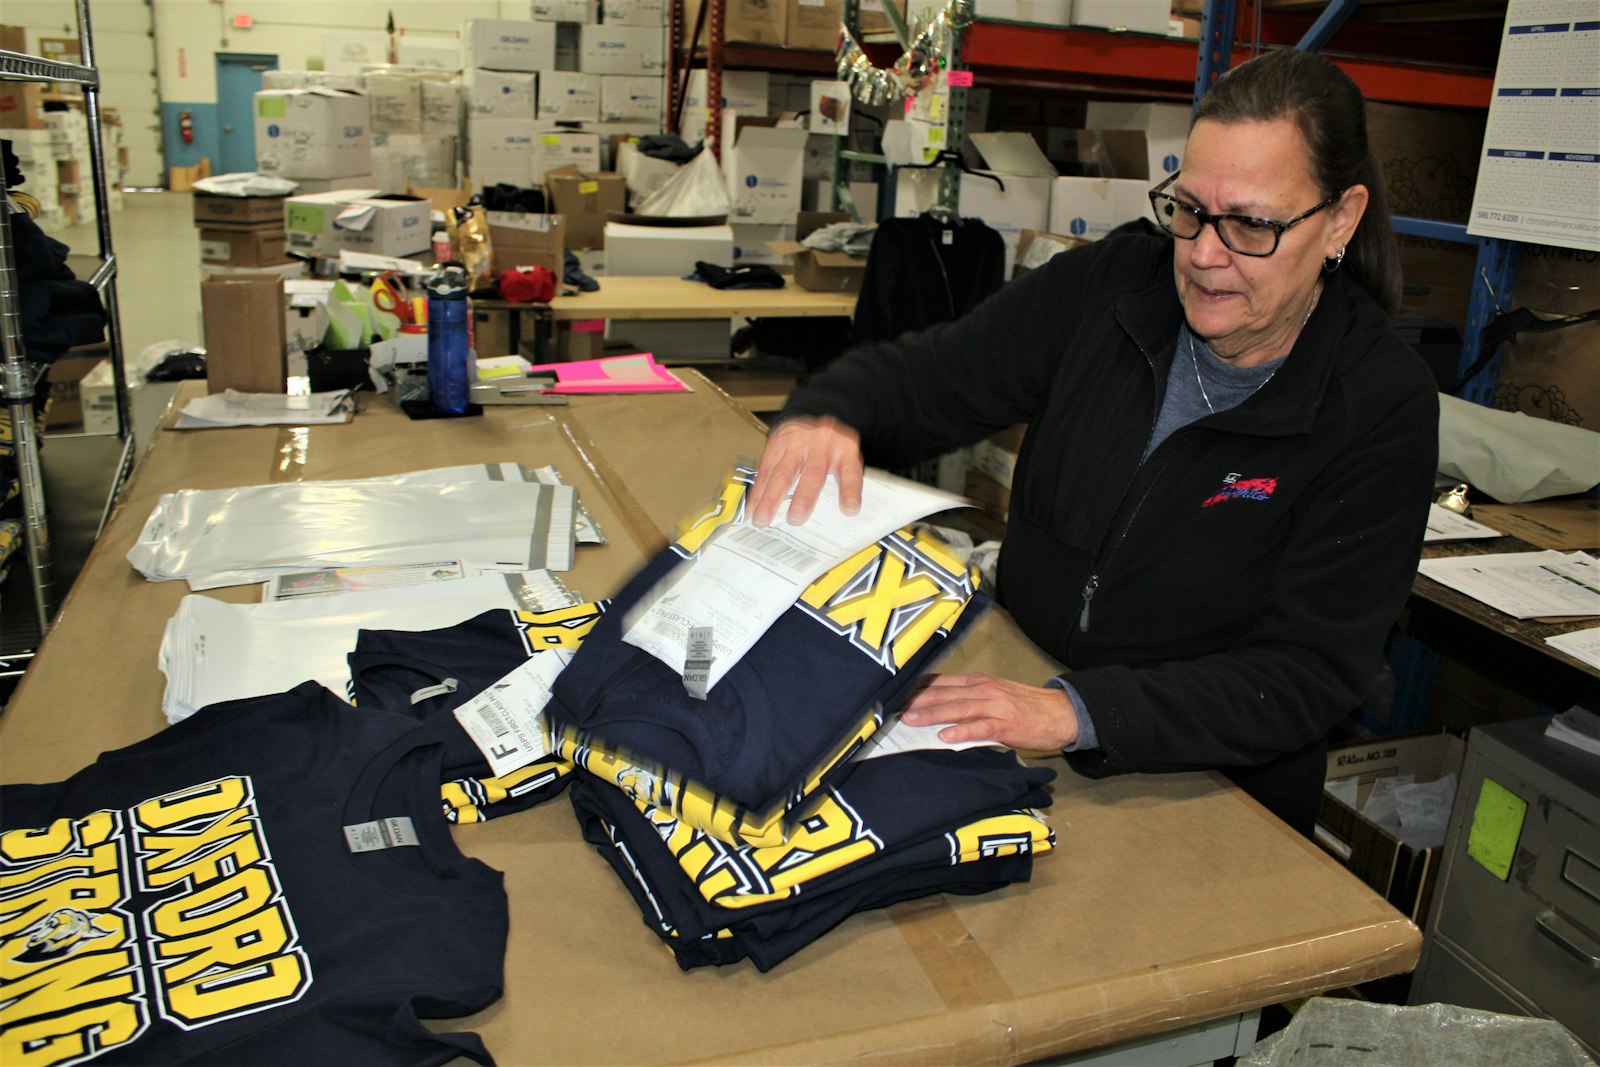 Carmen Ortiz of E.A. Graphics readies Oxford Strong shirt orders for shipping. Proceeds from the sale of the shirts will be donated to the Oxford Community Memorial and Victims Fund. (Photo by Wright Wilson | Special to Detroit Catholic)